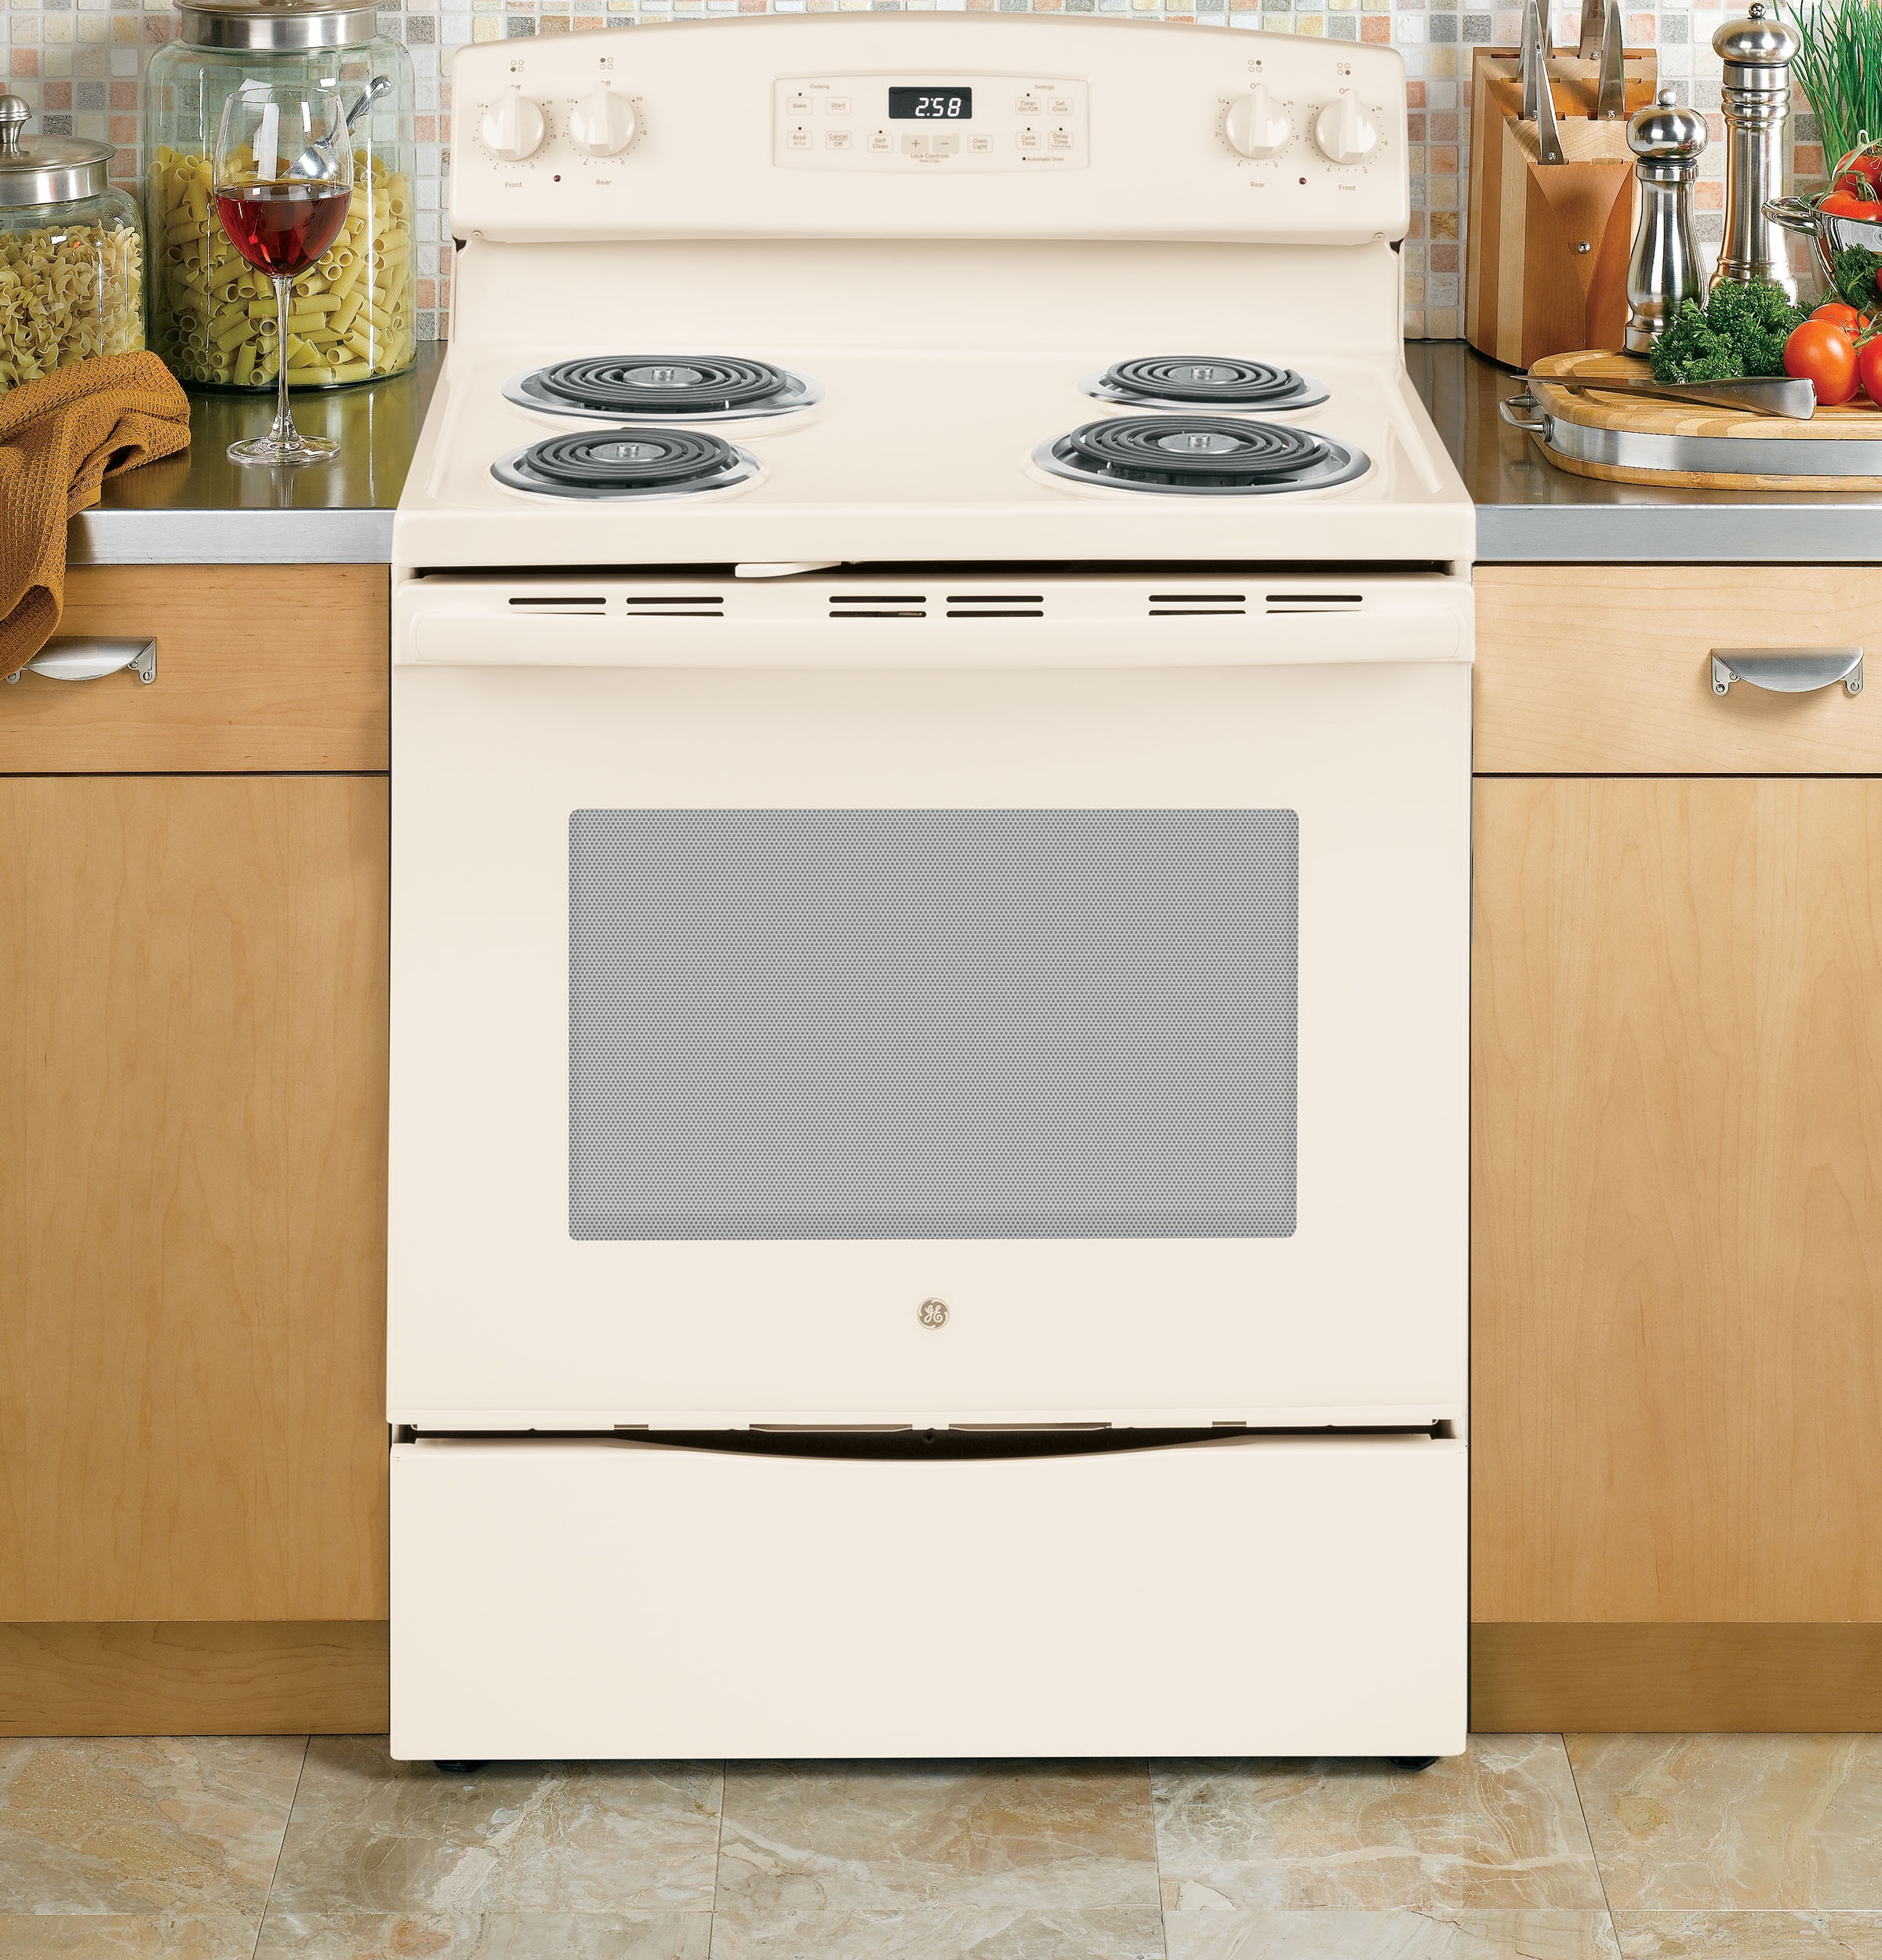 Building Product: Specialty Cooking Appliances [102e6b3]